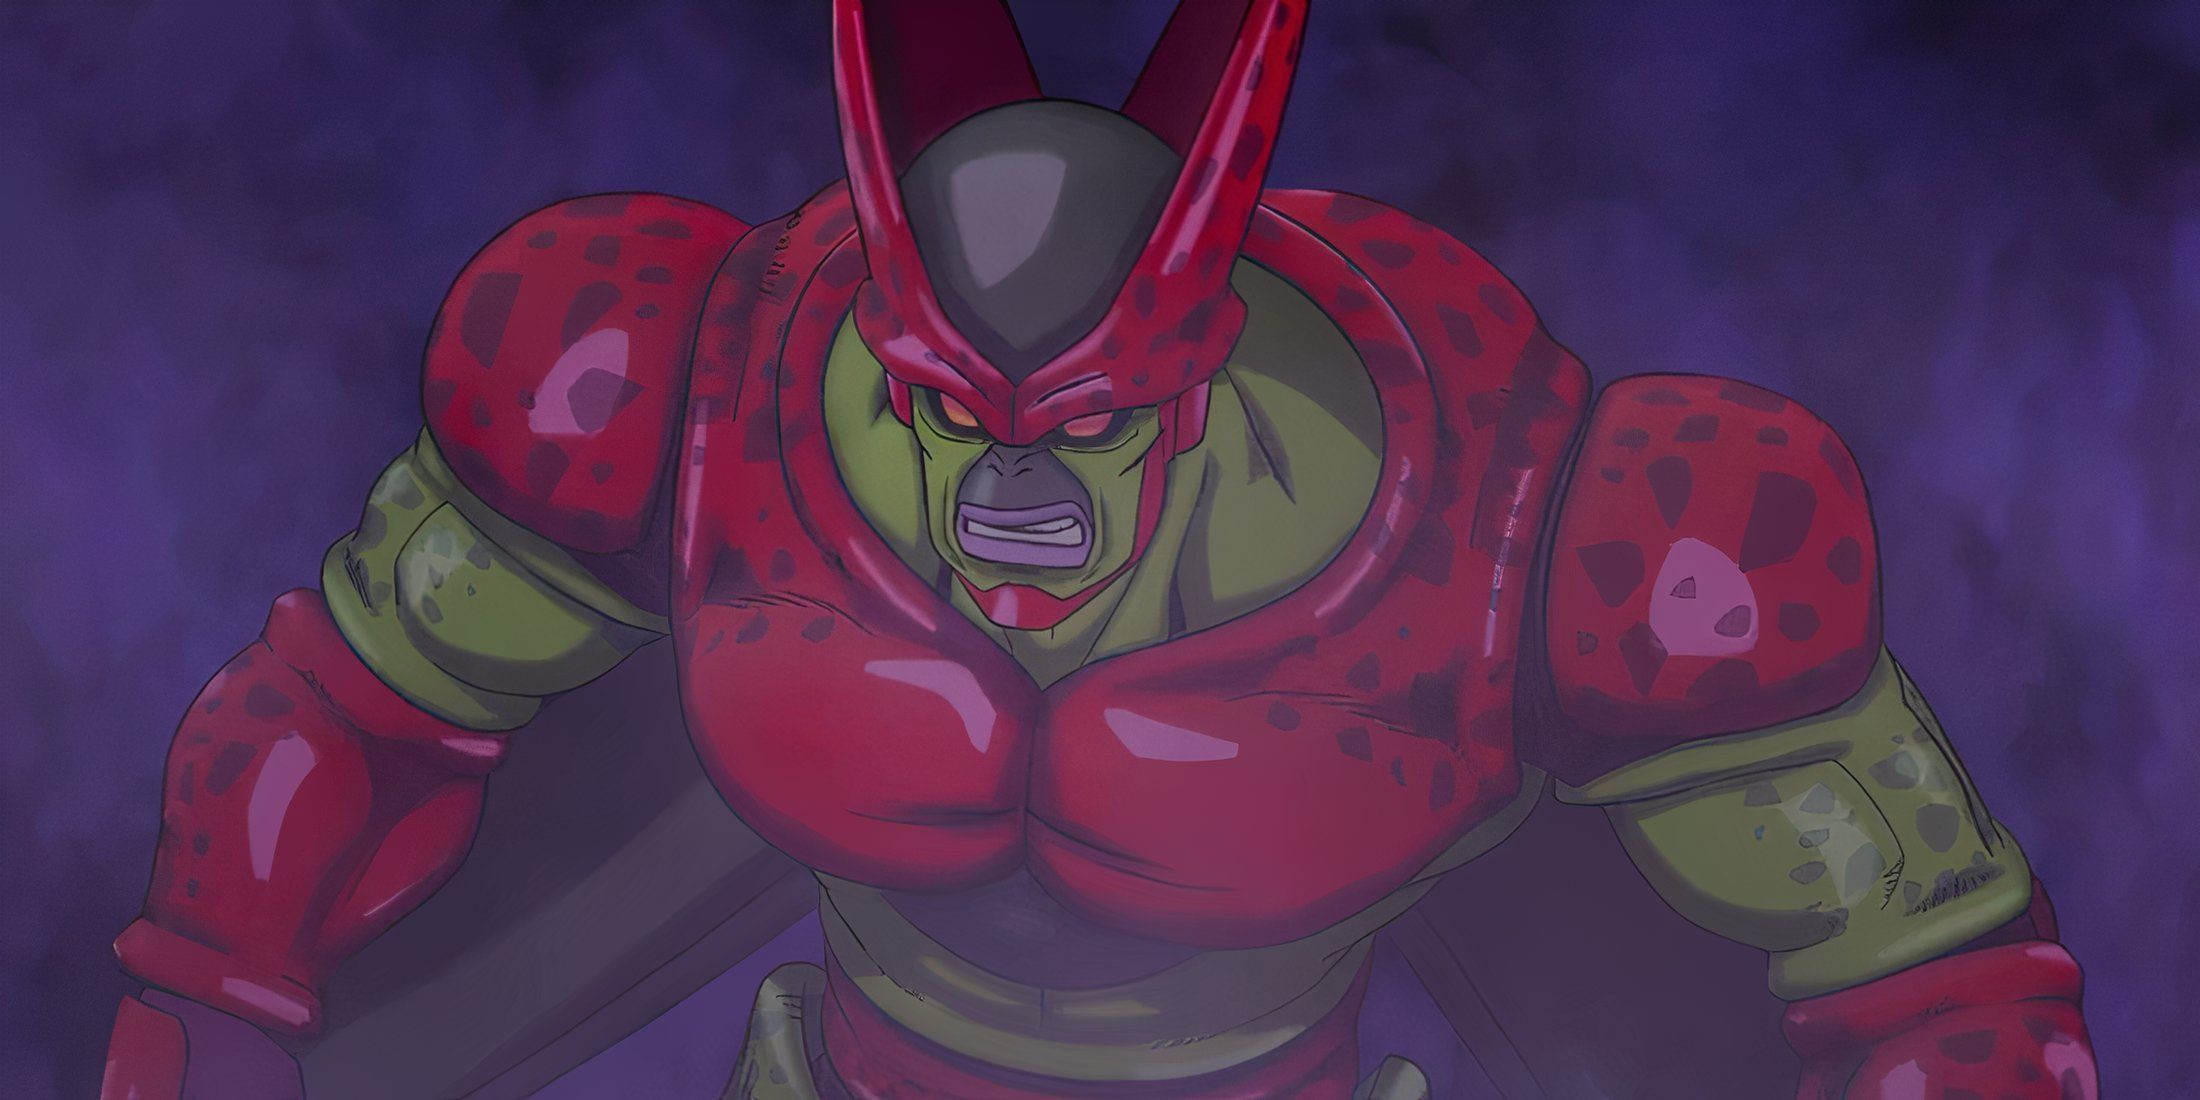 Why Cell Max Is Dragon Ball Super’s Worst Antagonist - Featured